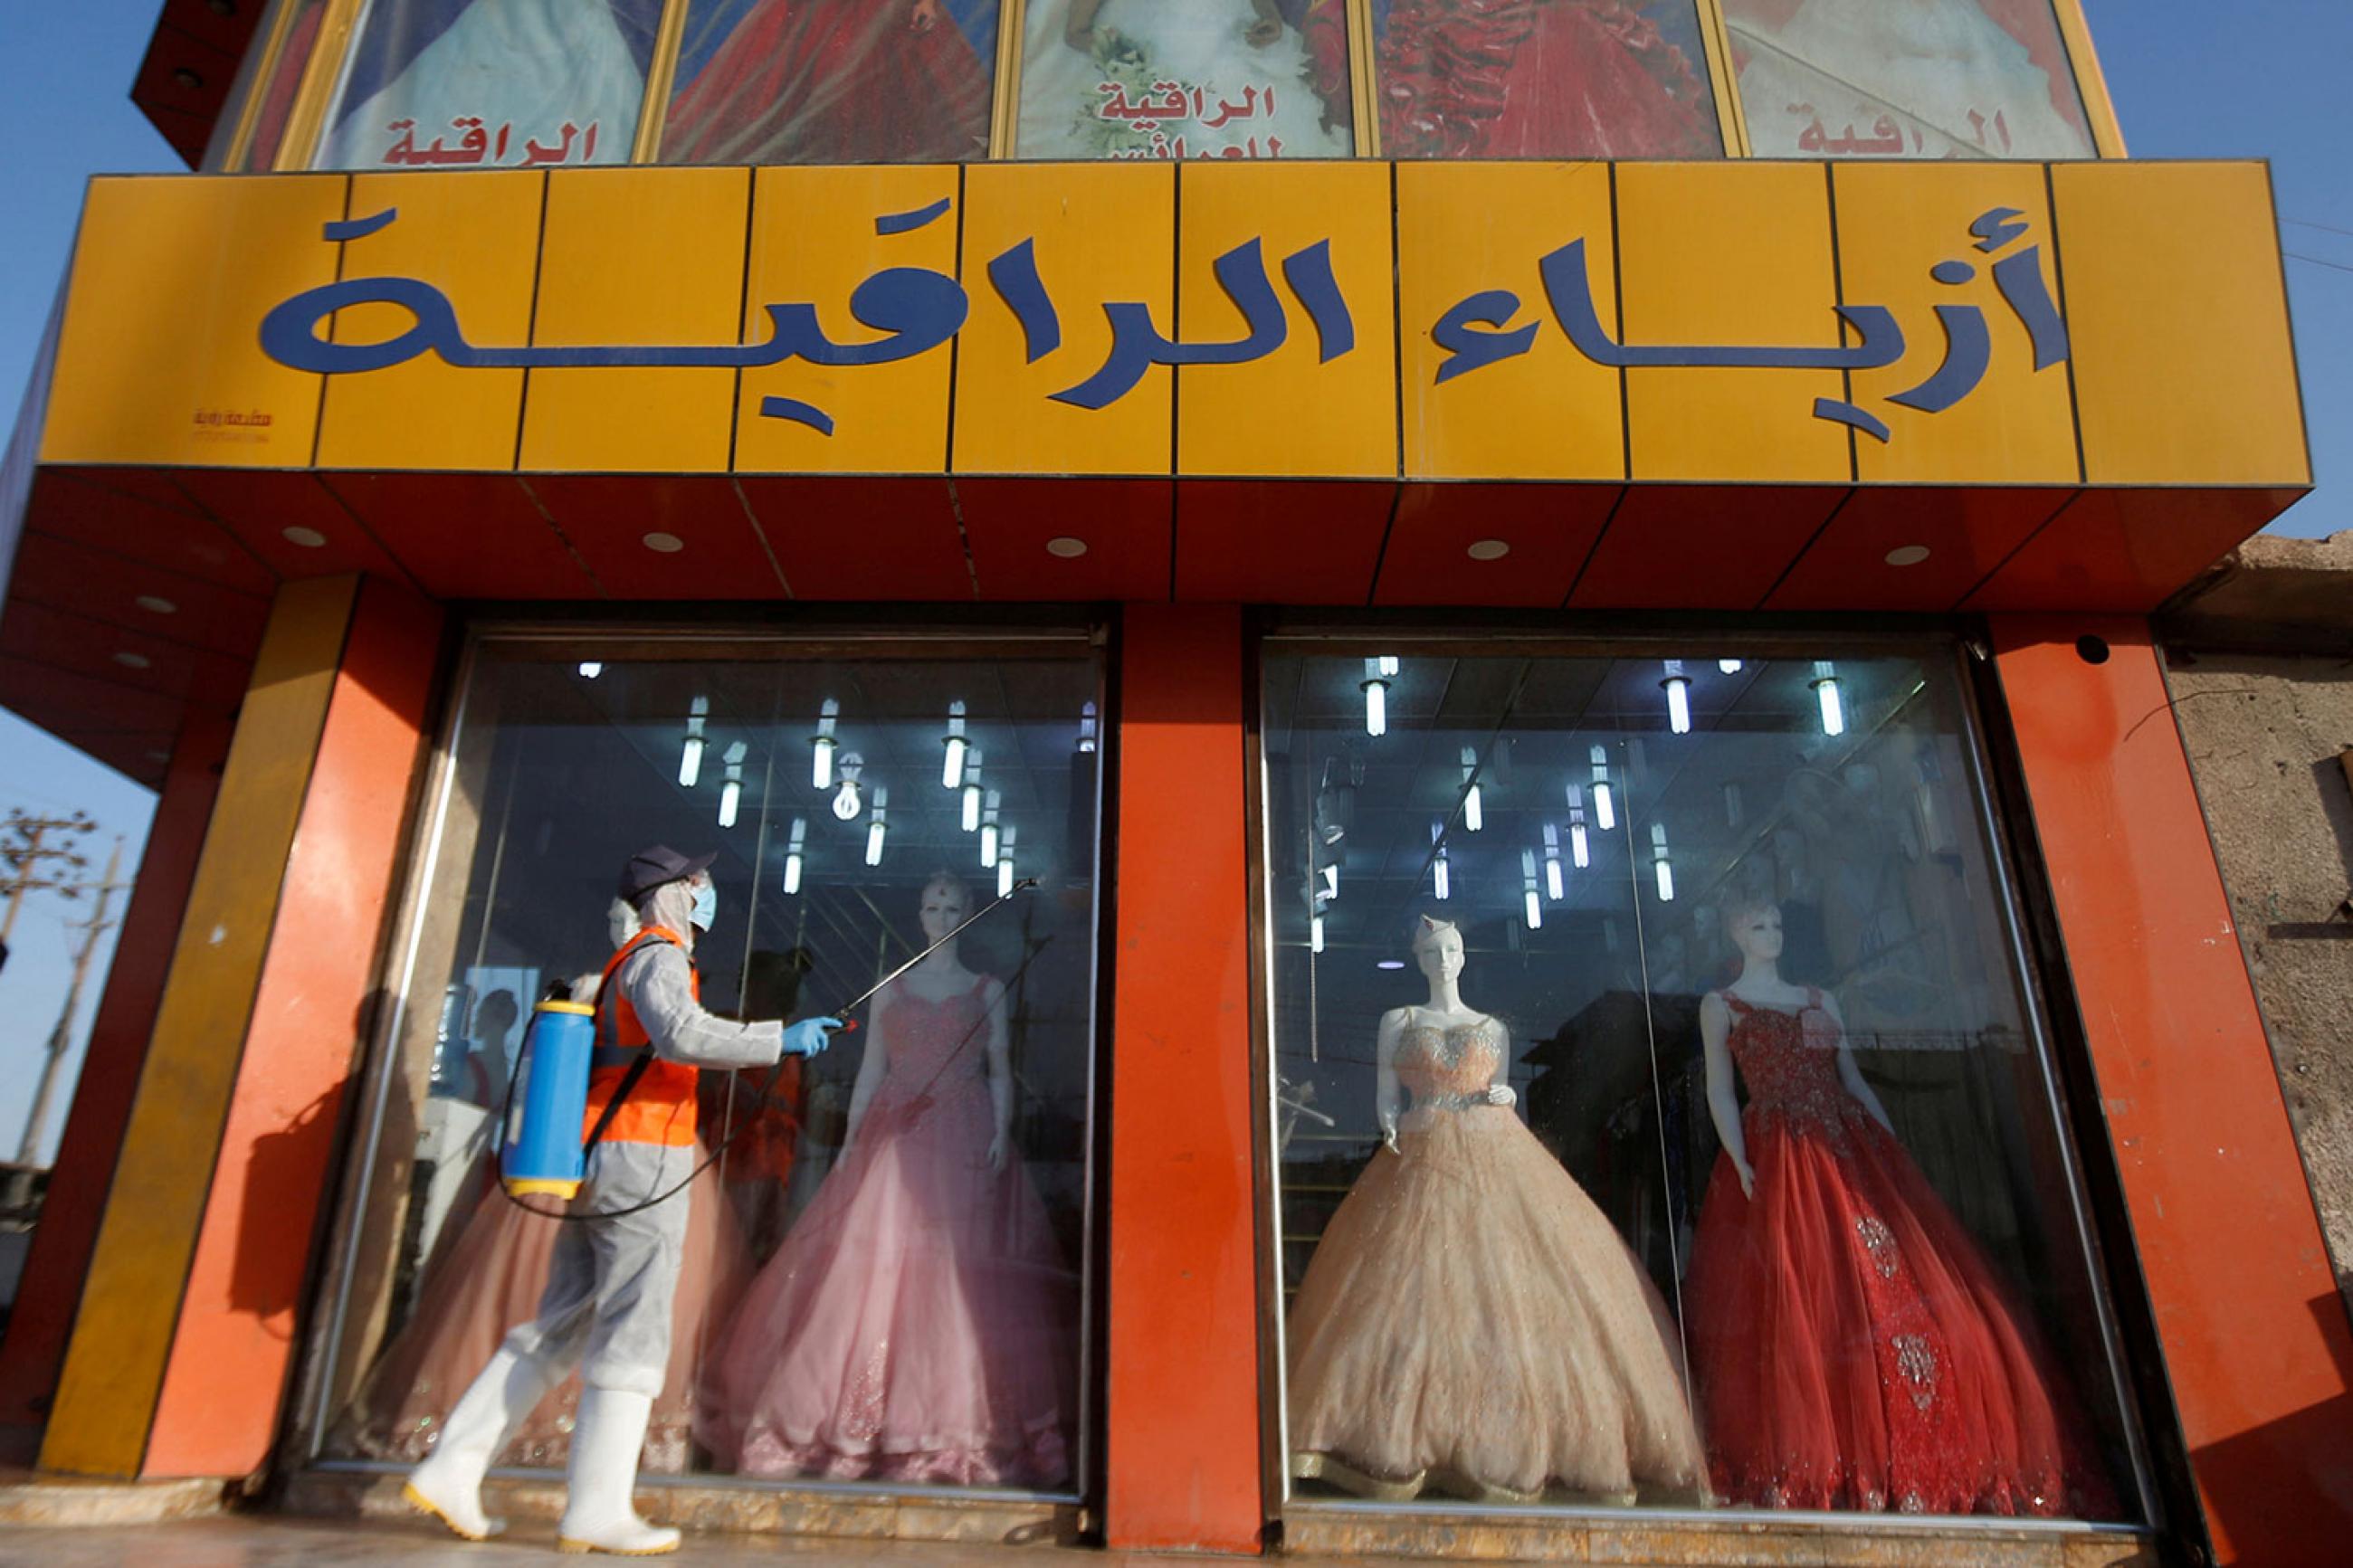 A worker in protective suit sprays disinfectants in front of a dress shop at popular market following the outbreak of the coronavirus in Basra, Iraq on March 10, 2020. This is an interesting photo showing a colorful dress shop with a worker walking by outside in protective gear spraying disinfectant. REUTERS/Essam al-Sudani 